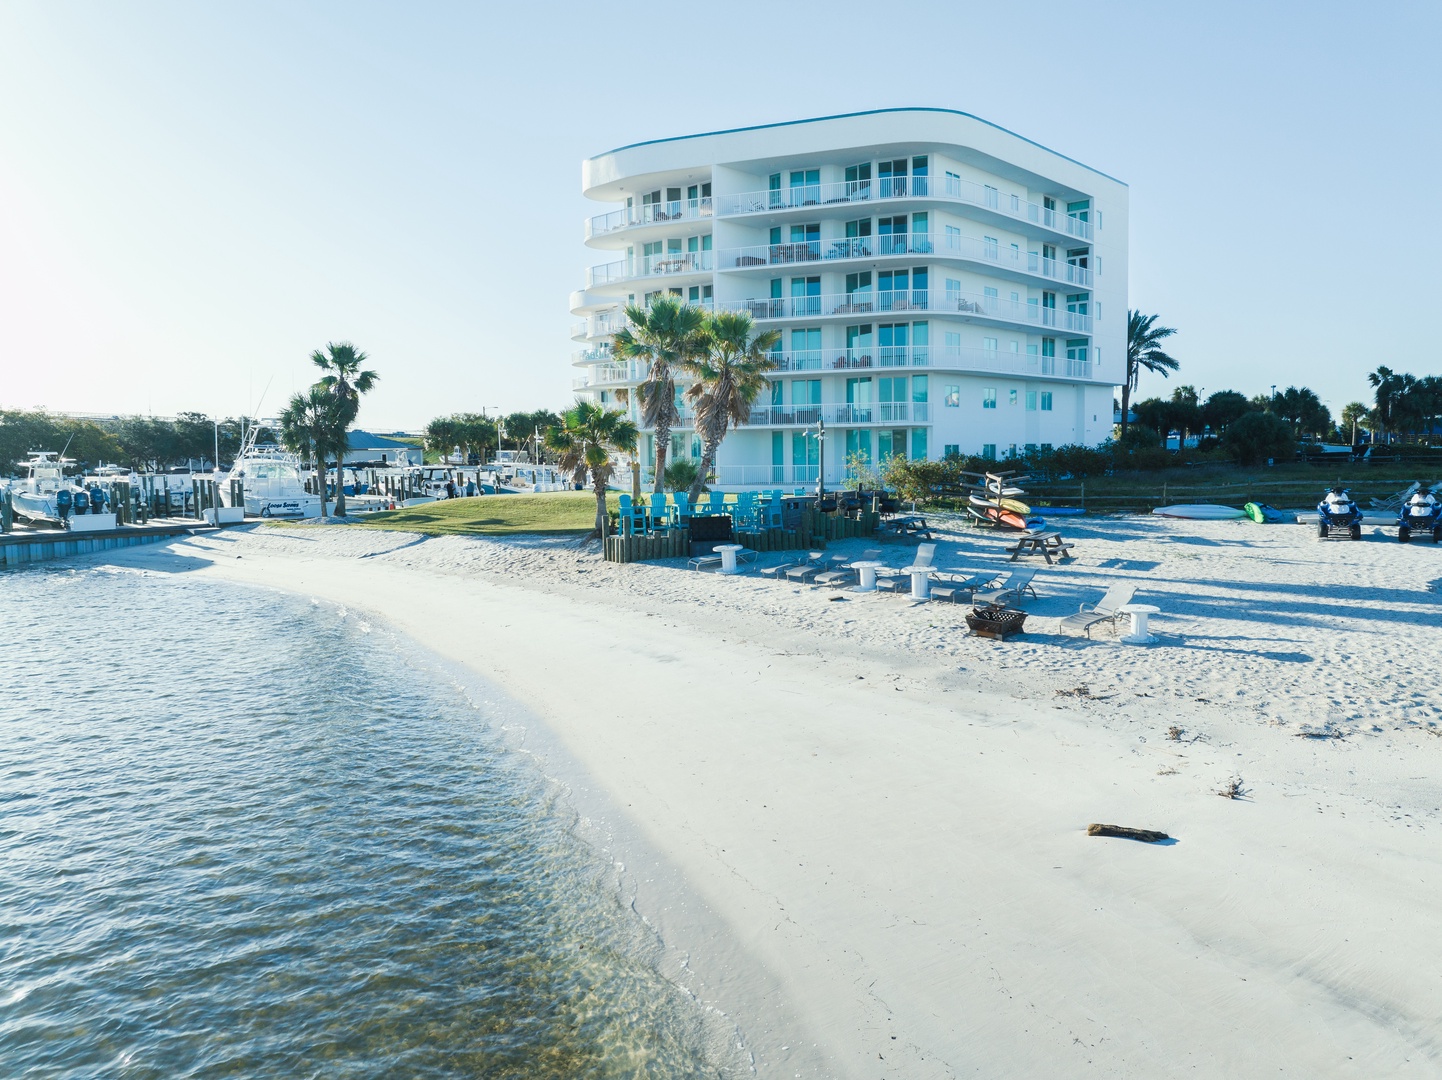 Lounge on the community's private bay beach or launch a kayak for some fun on the water!